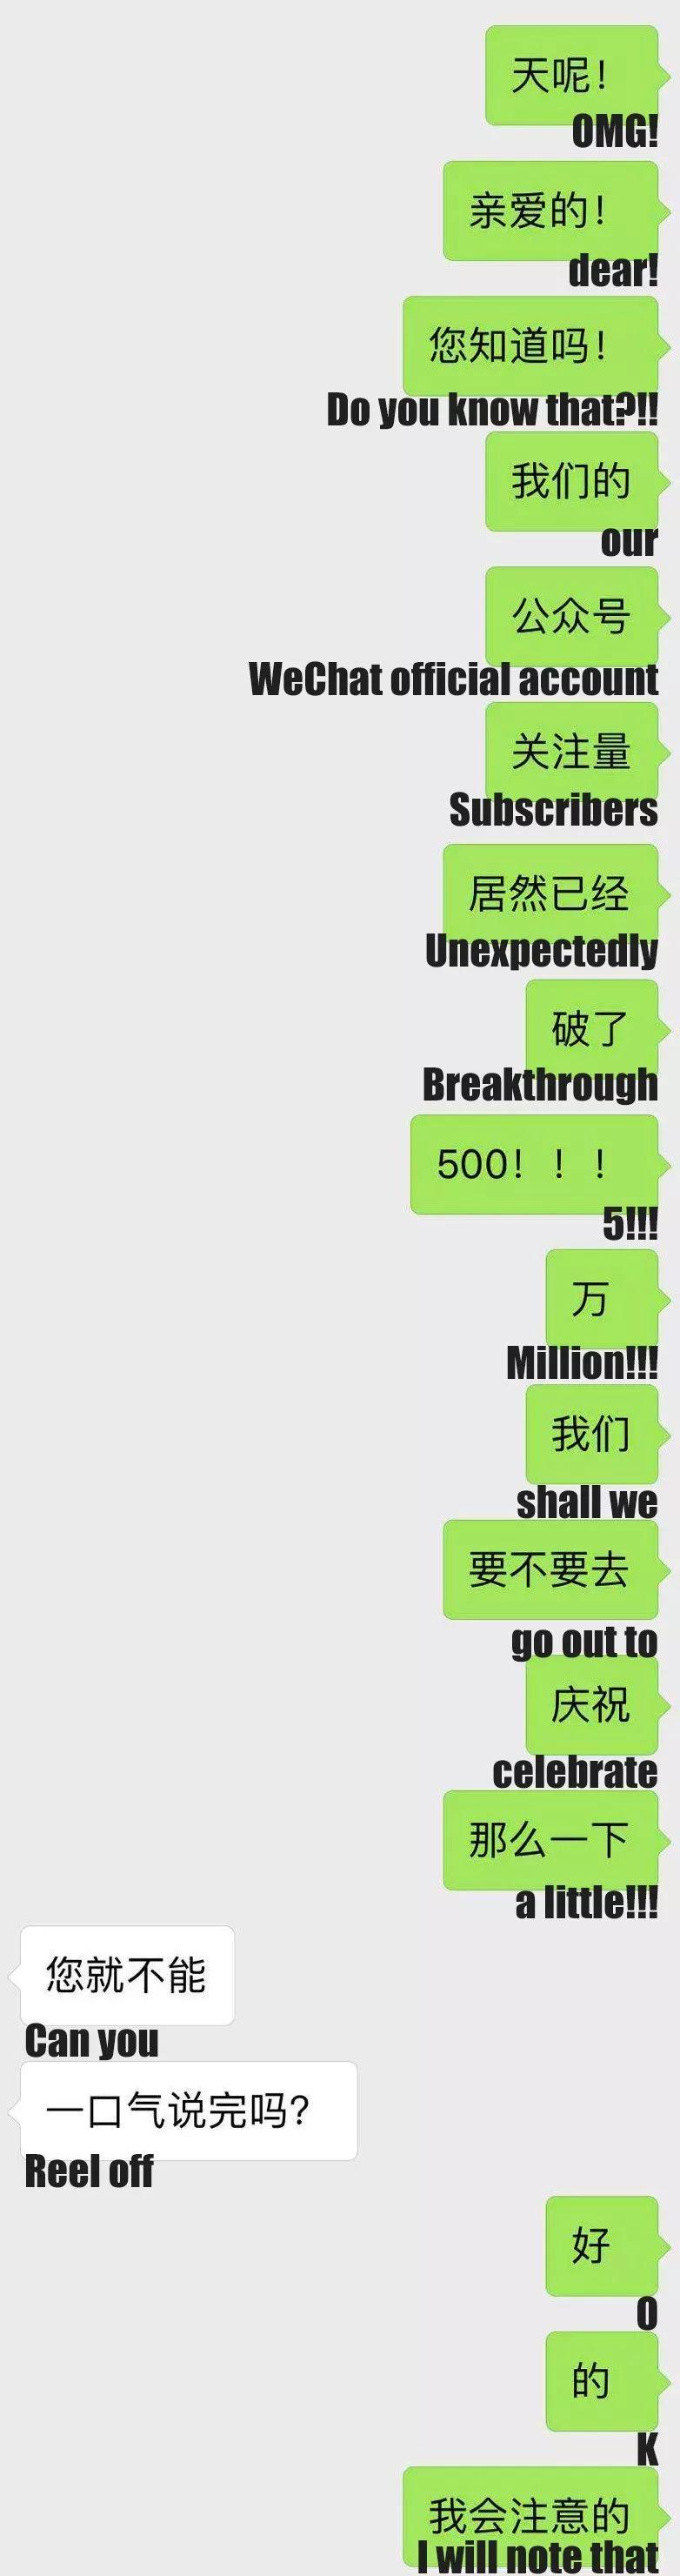 avoid doing these things in wechat! do's & don'ts!